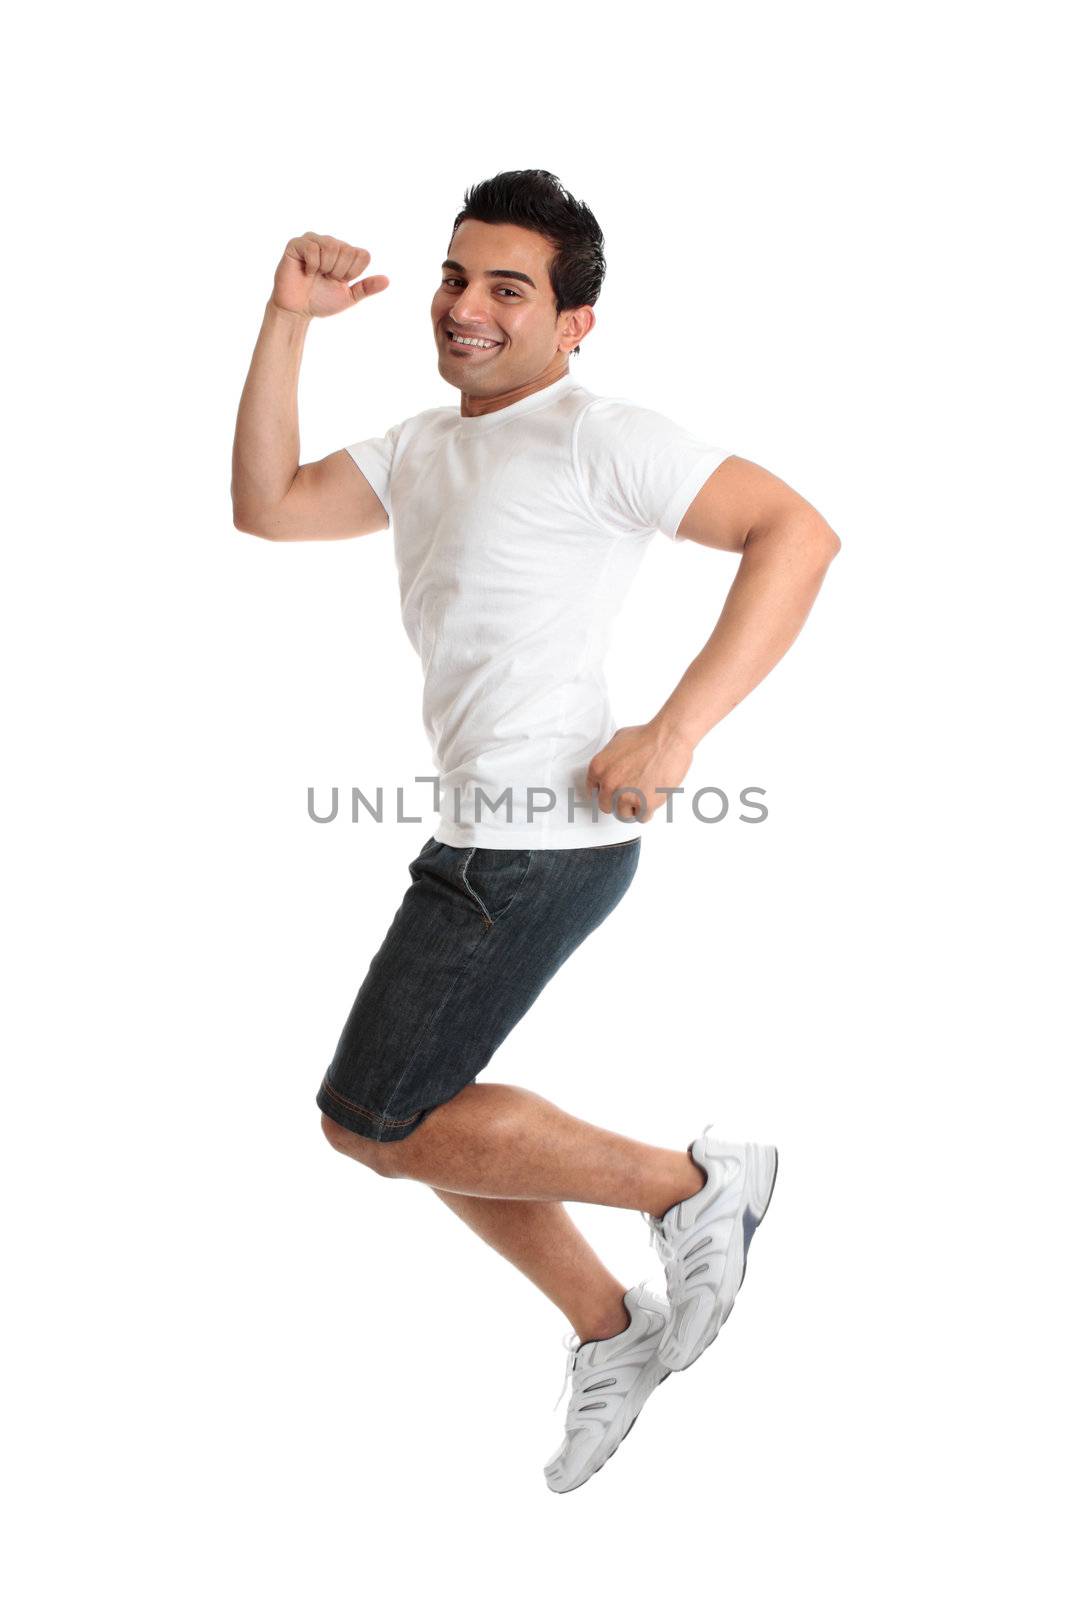 An excited jumping leaping man wearing casual clothes - success victory triumph.  Joyful young person smiling as he celebrates something.